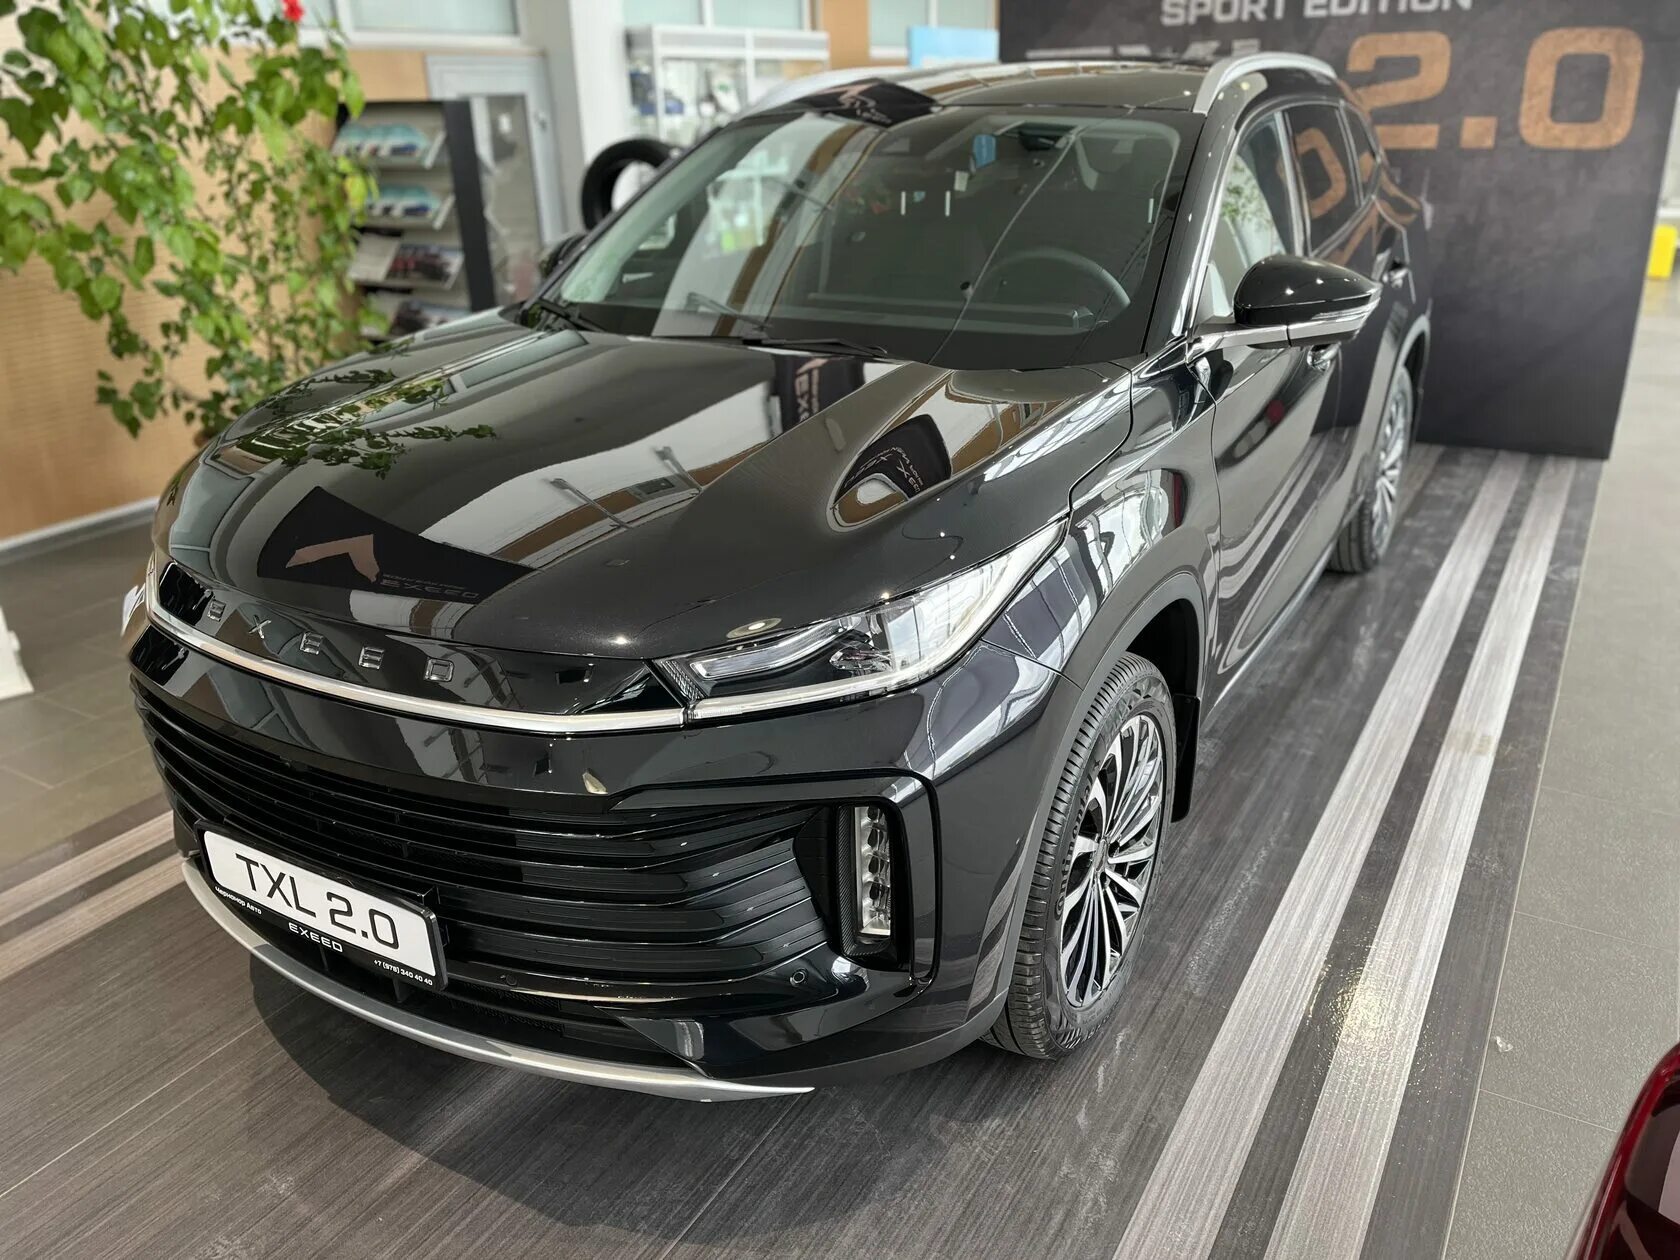 Exeed TXL 2022 Sport Edition. Chery exceed TXL 2022 2.0 Sport Edition. Эксид ТХЛ 2.0 2022. Exceed TXL Sport Edition 2022. Exceed 2.0 sport